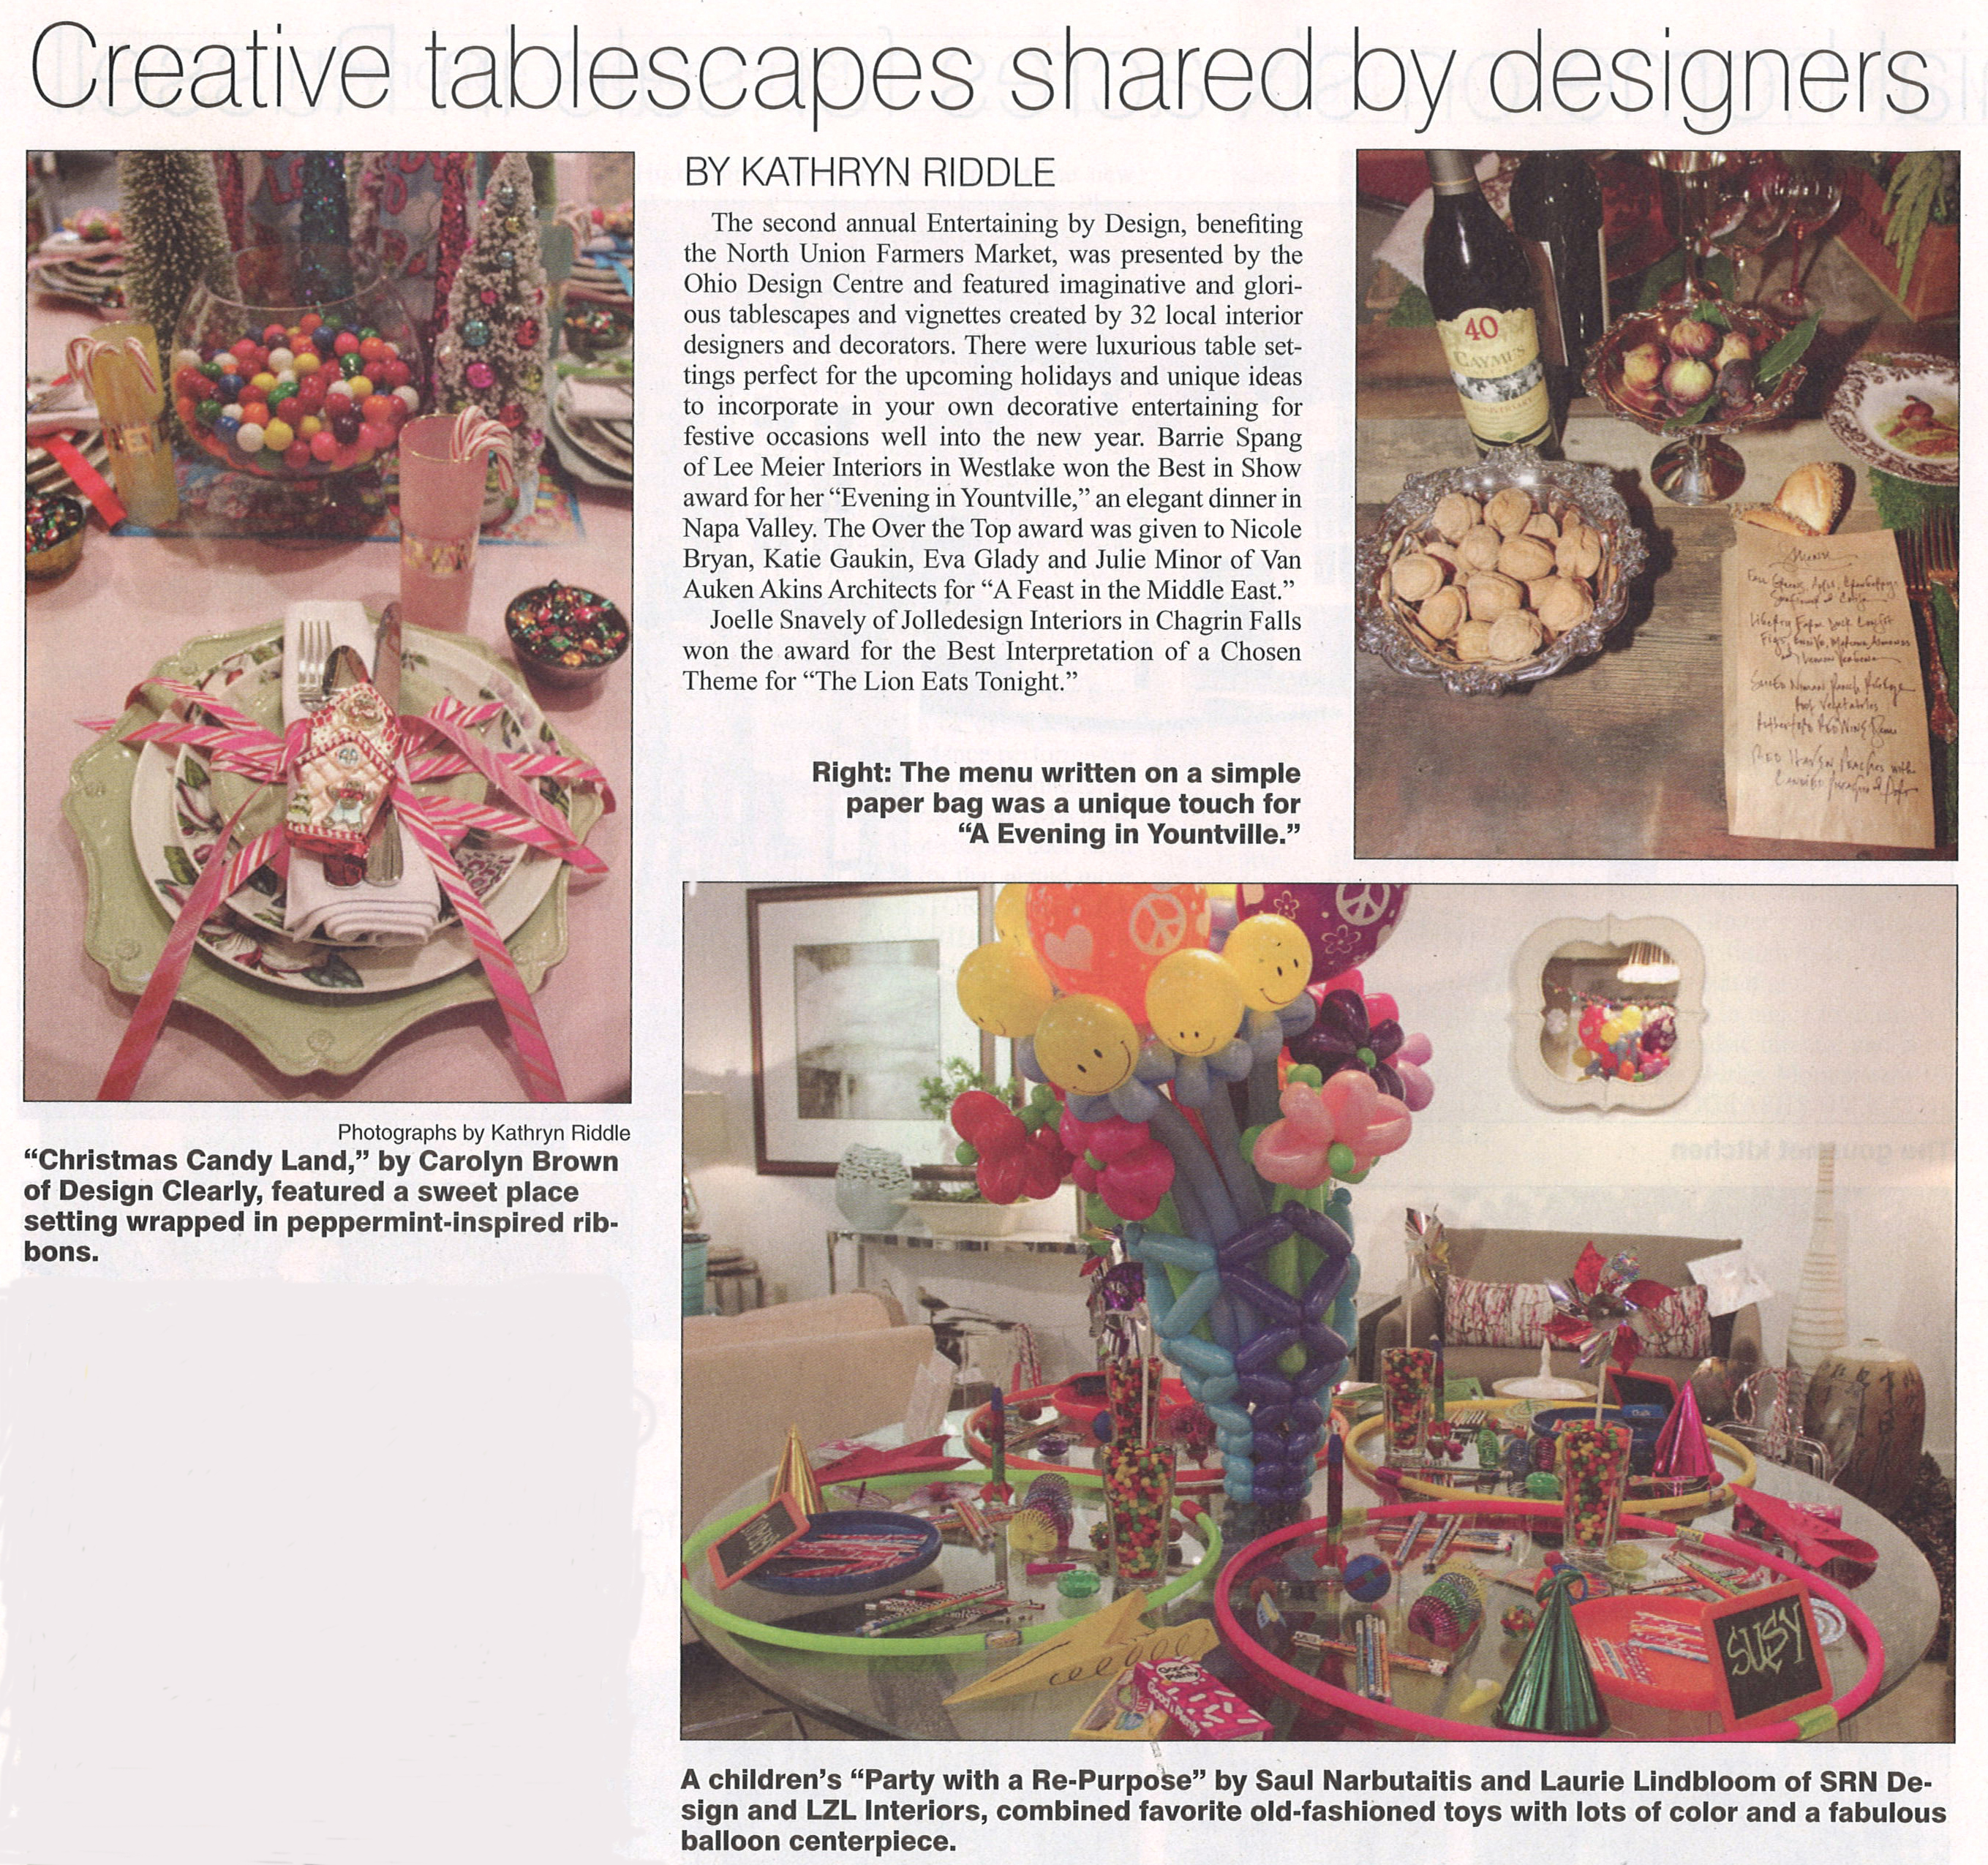 Creative tablescapes shared by designers